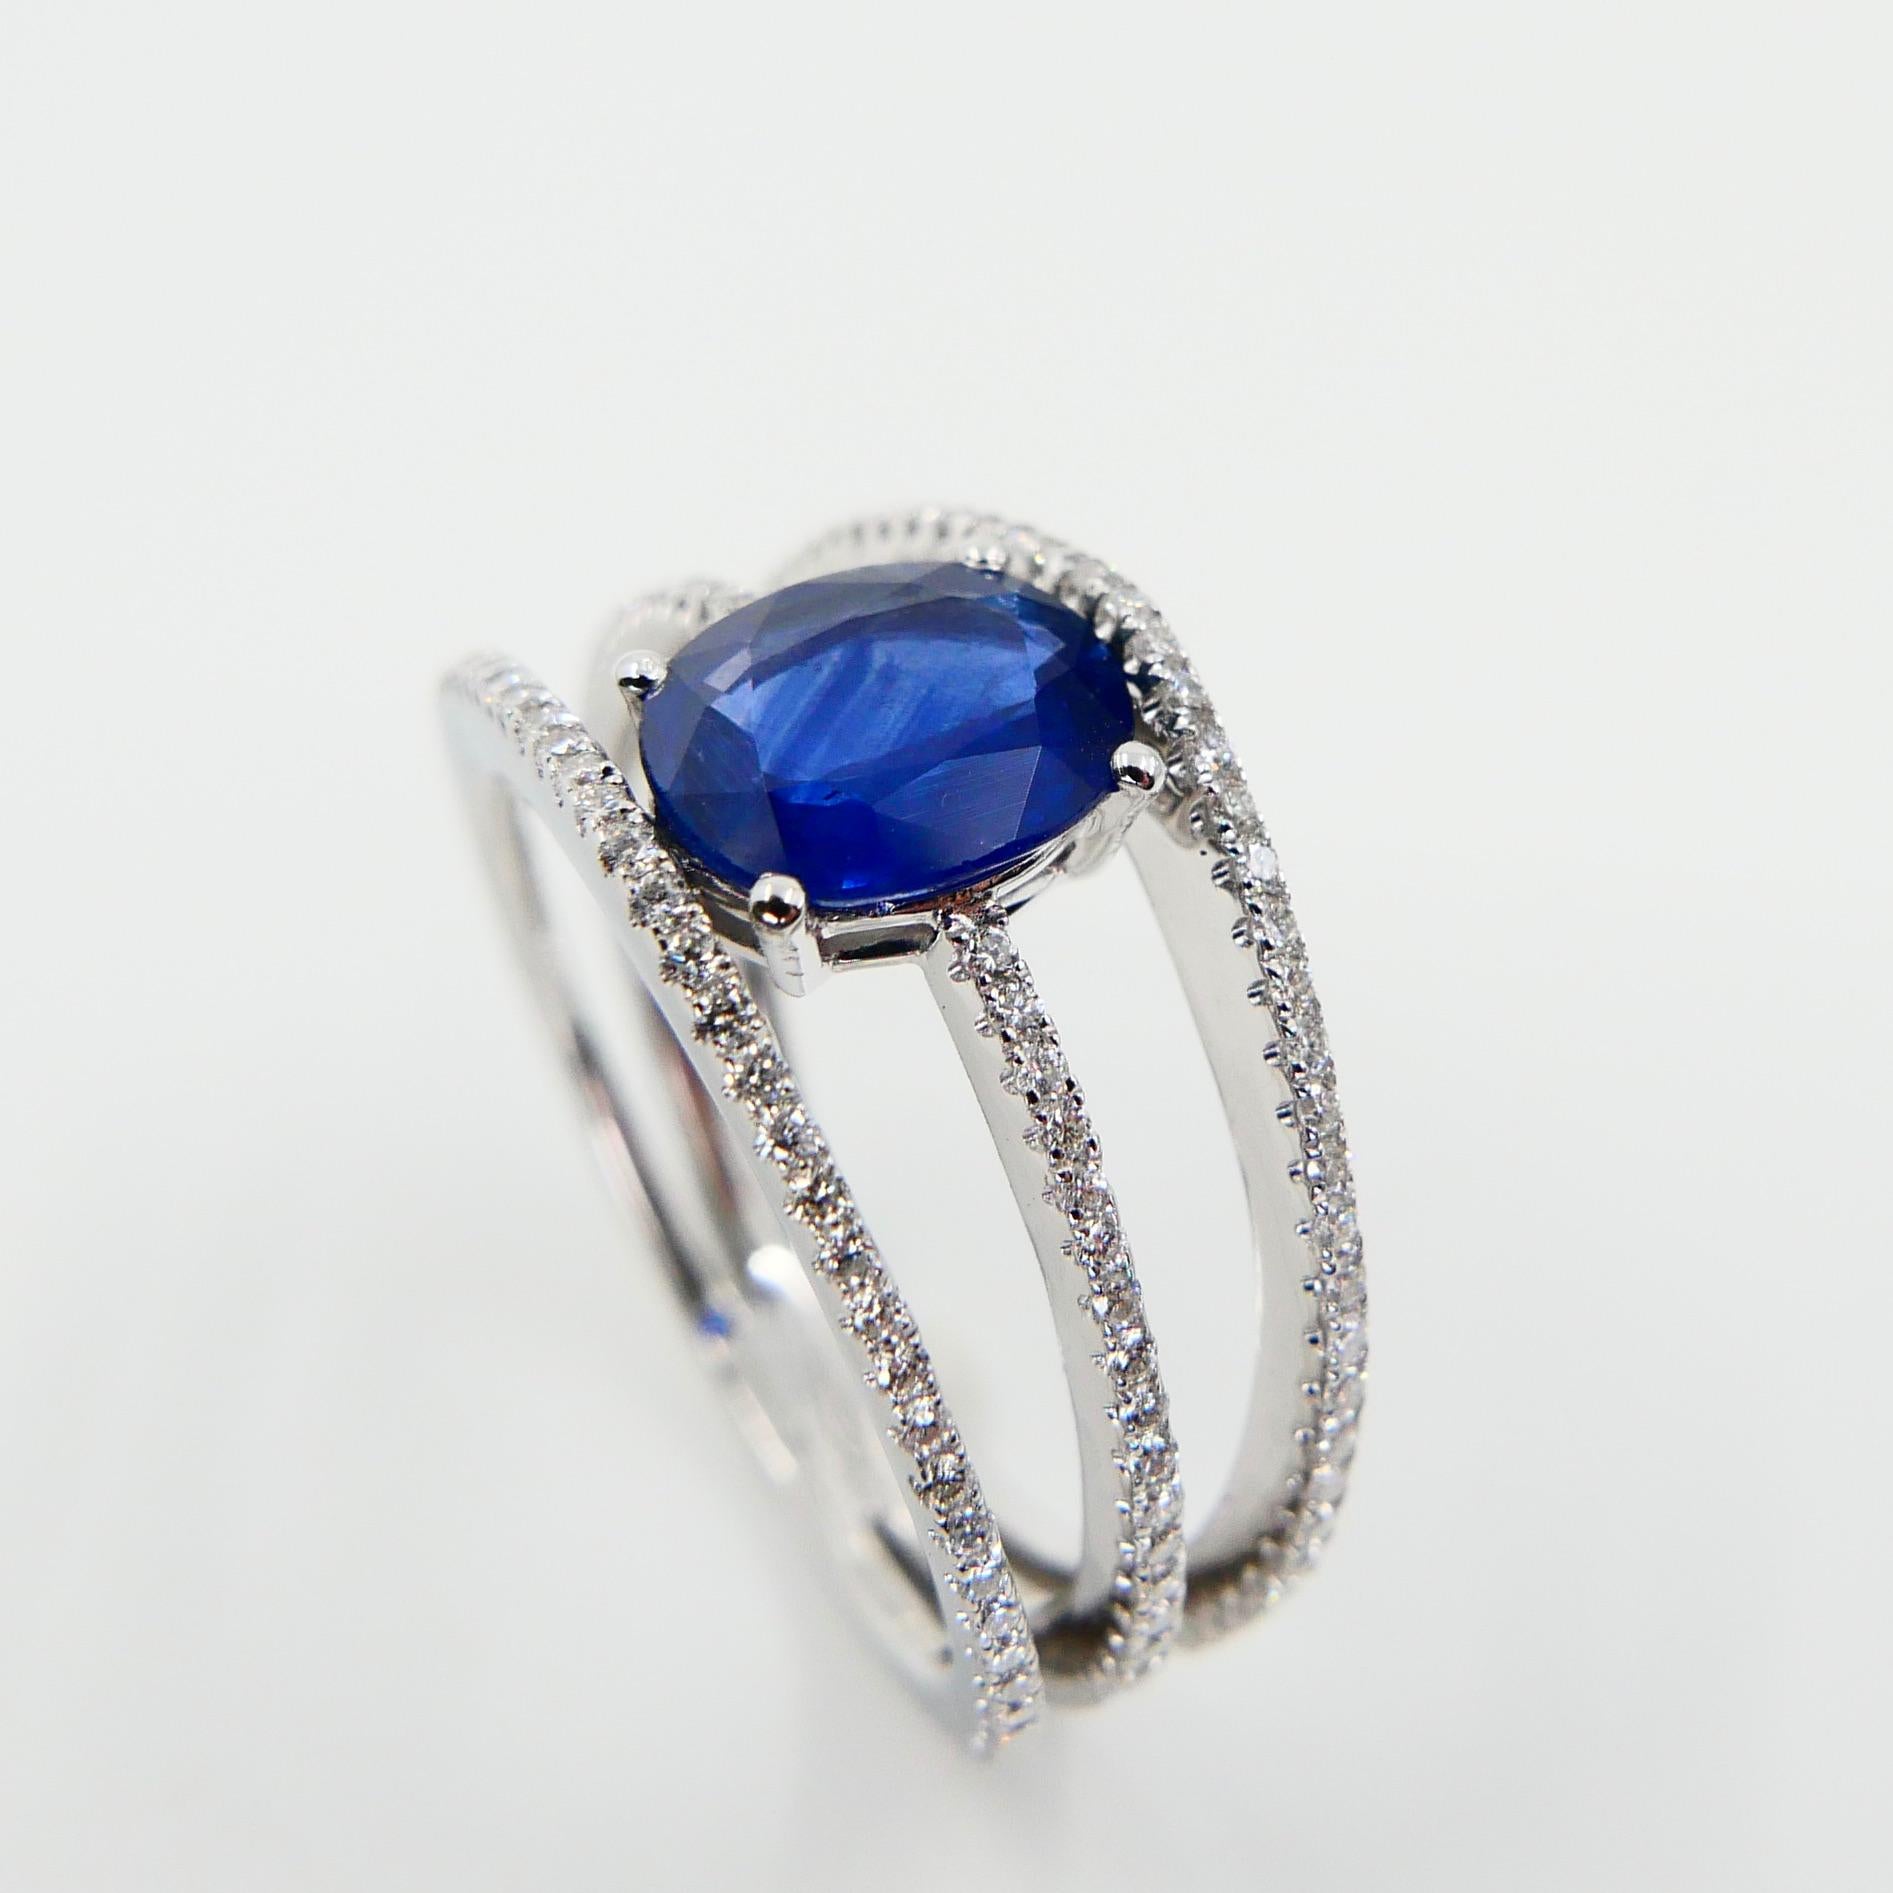 Blue Sapphire and Diamond Cocktail Ring, 3 Rows Design, 18 Karat White Gold In New Condition For Sale In Hong Kong, HK